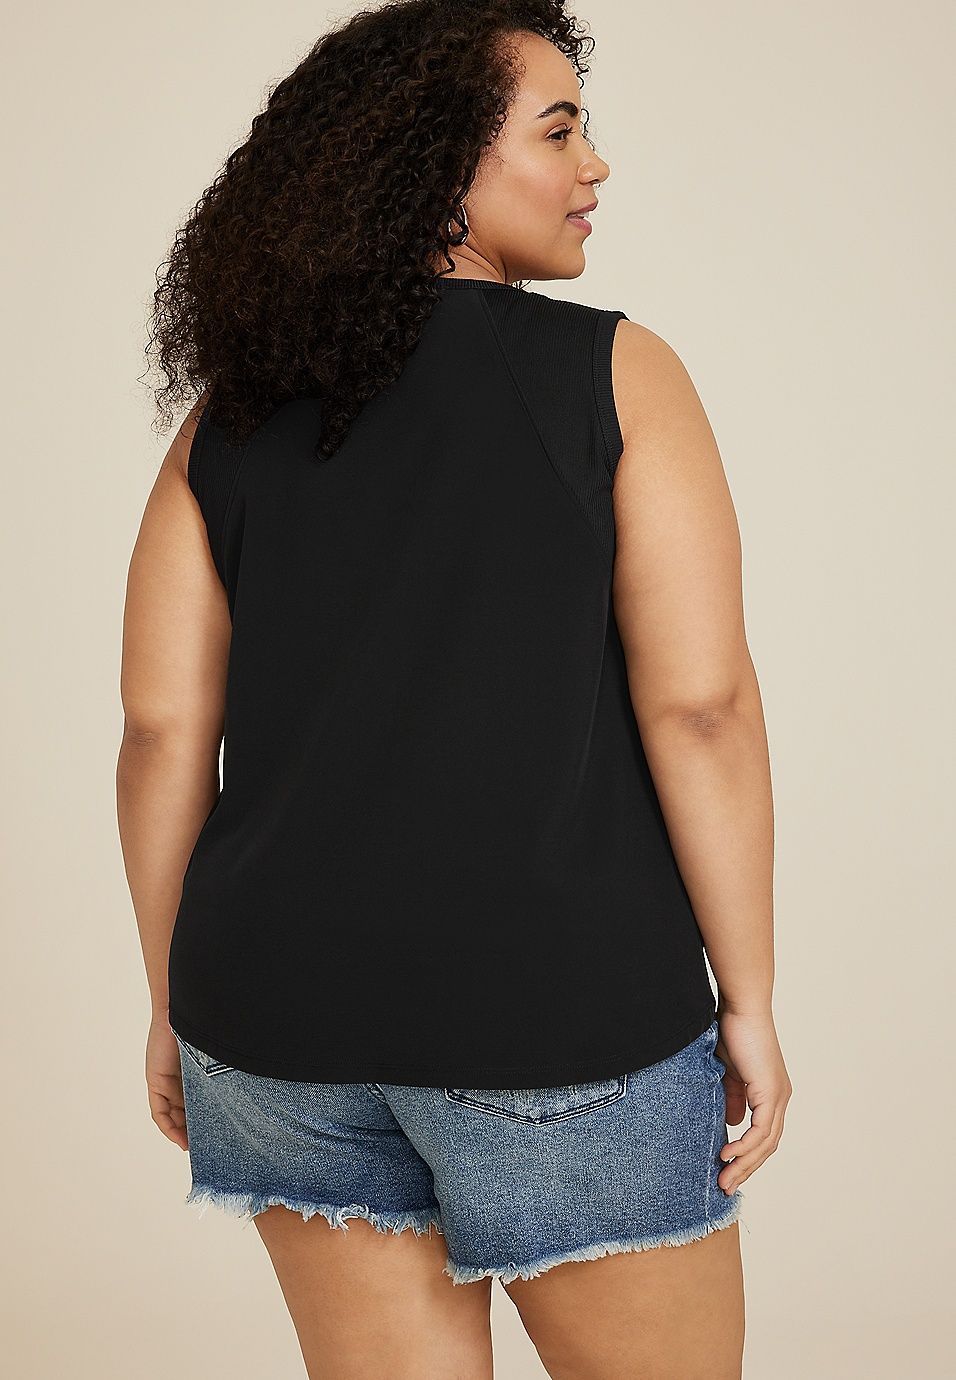 Plus Size Athleisure Tank Top | Maurices